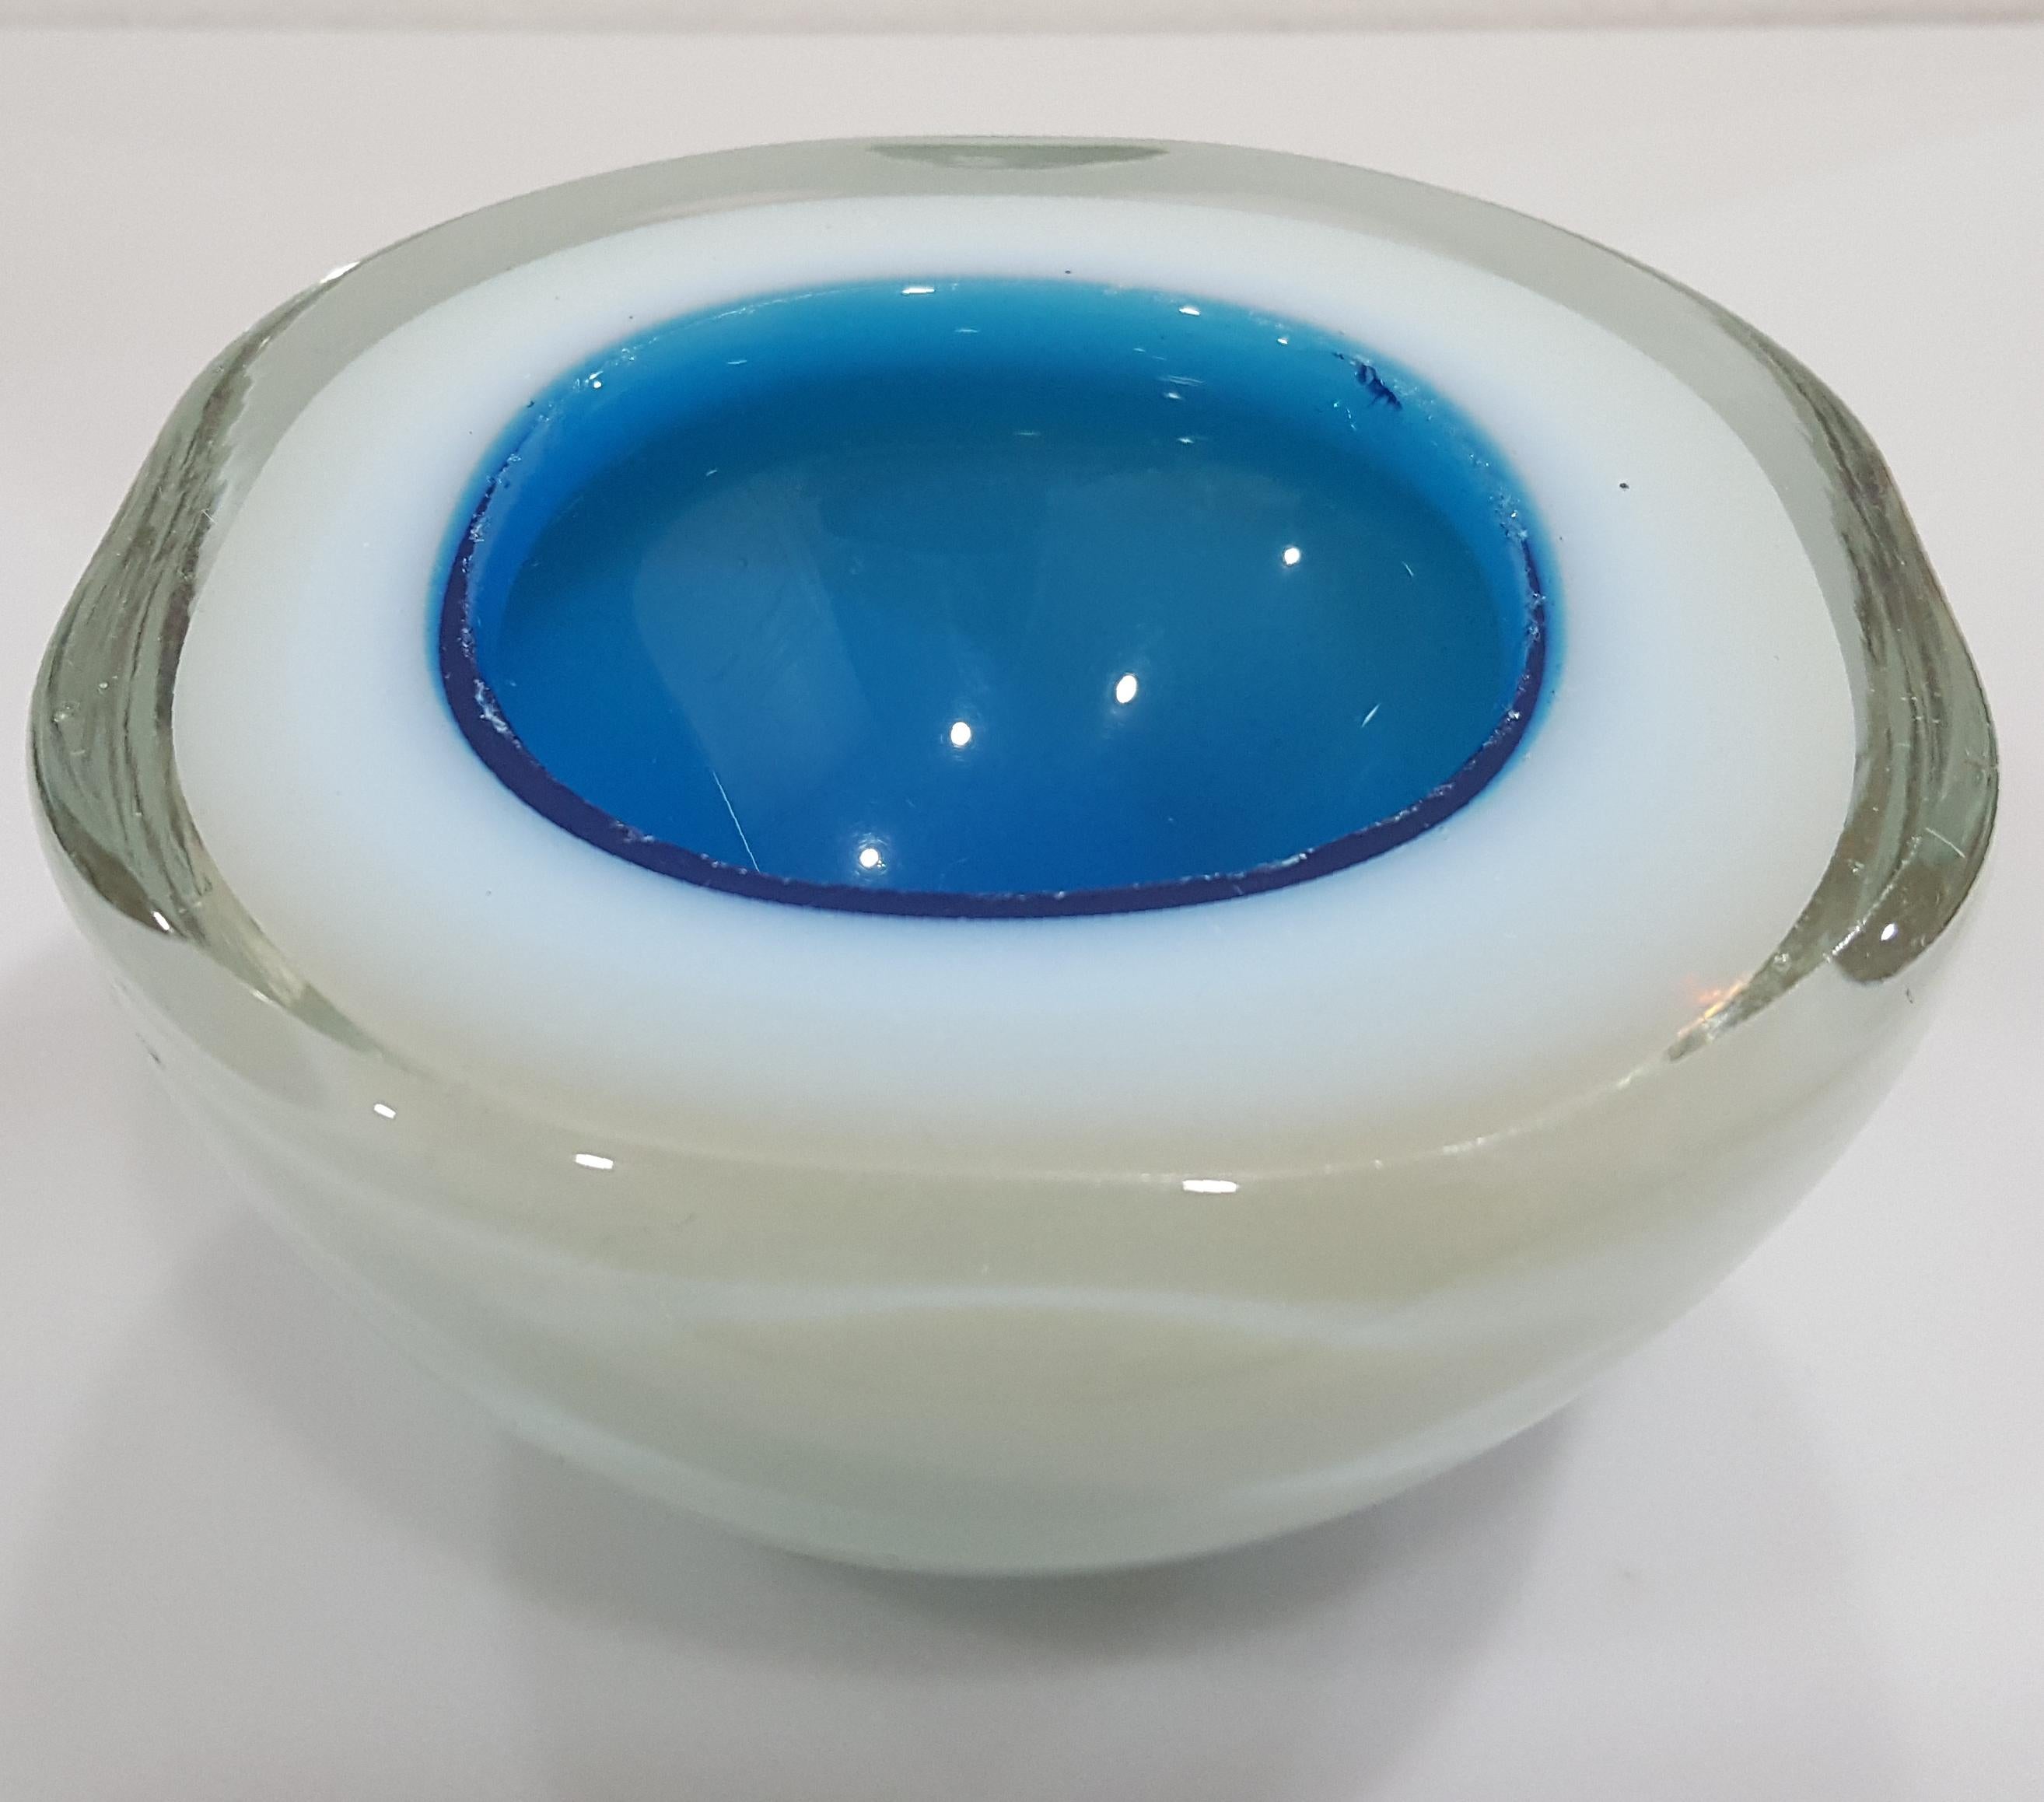 Murano Glass Triple Cased Geode Bowl likely by Cenedese or Seguso.
It measures about 5